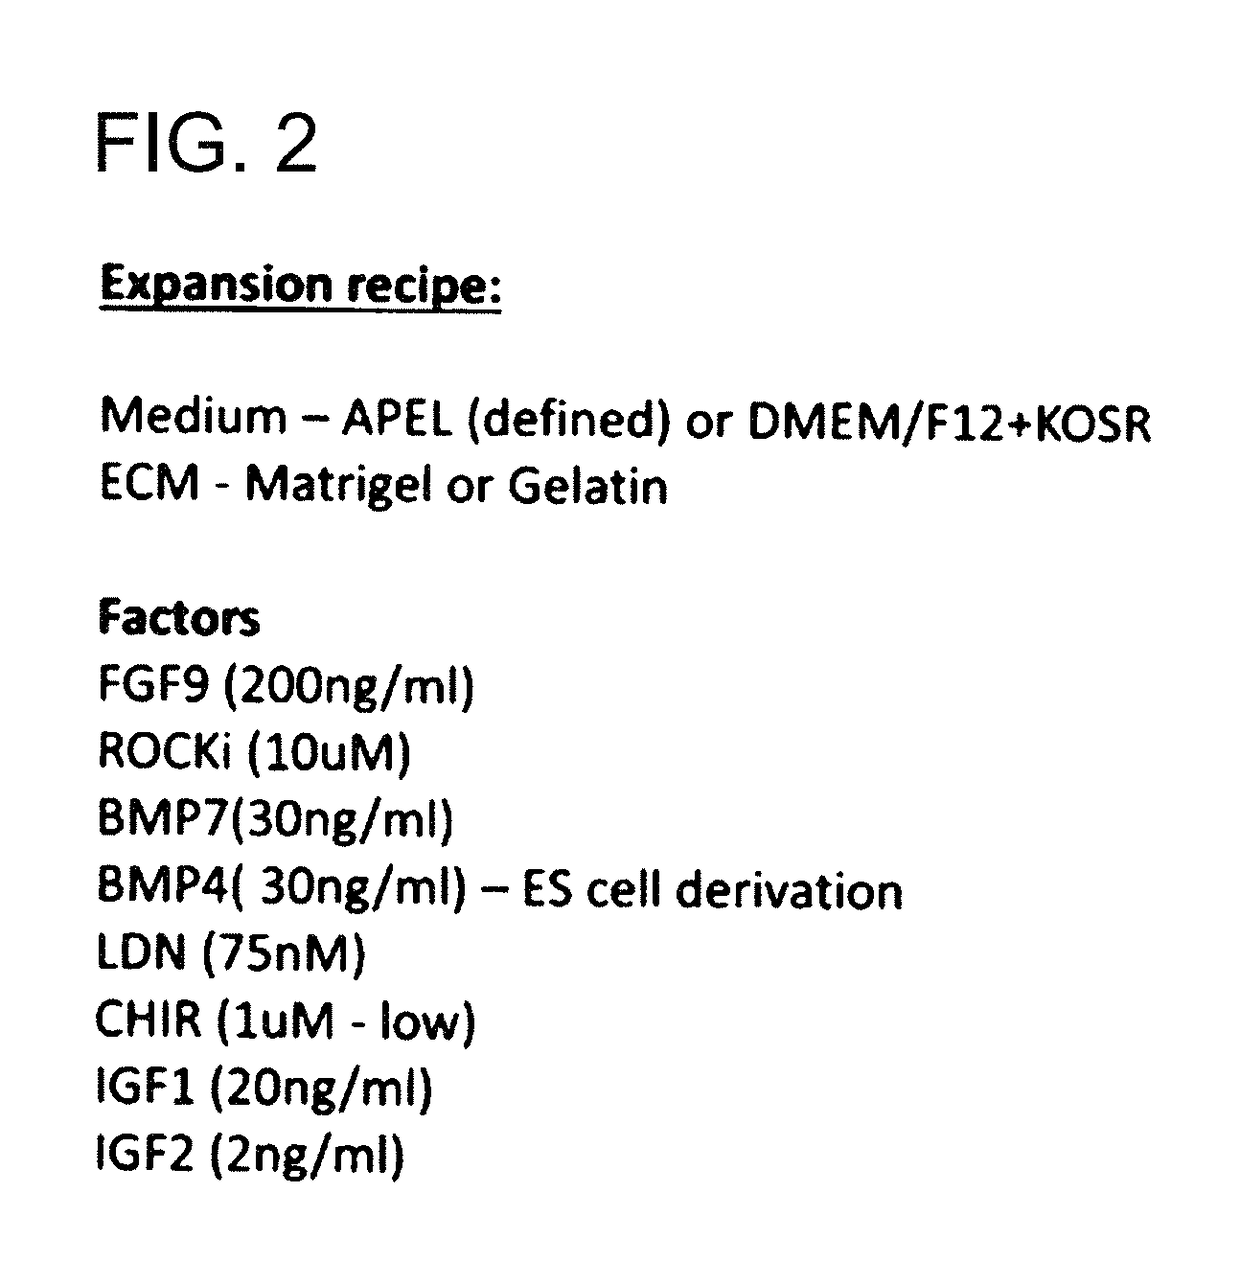 Culture conditions for expansion of nephron progenitor cells